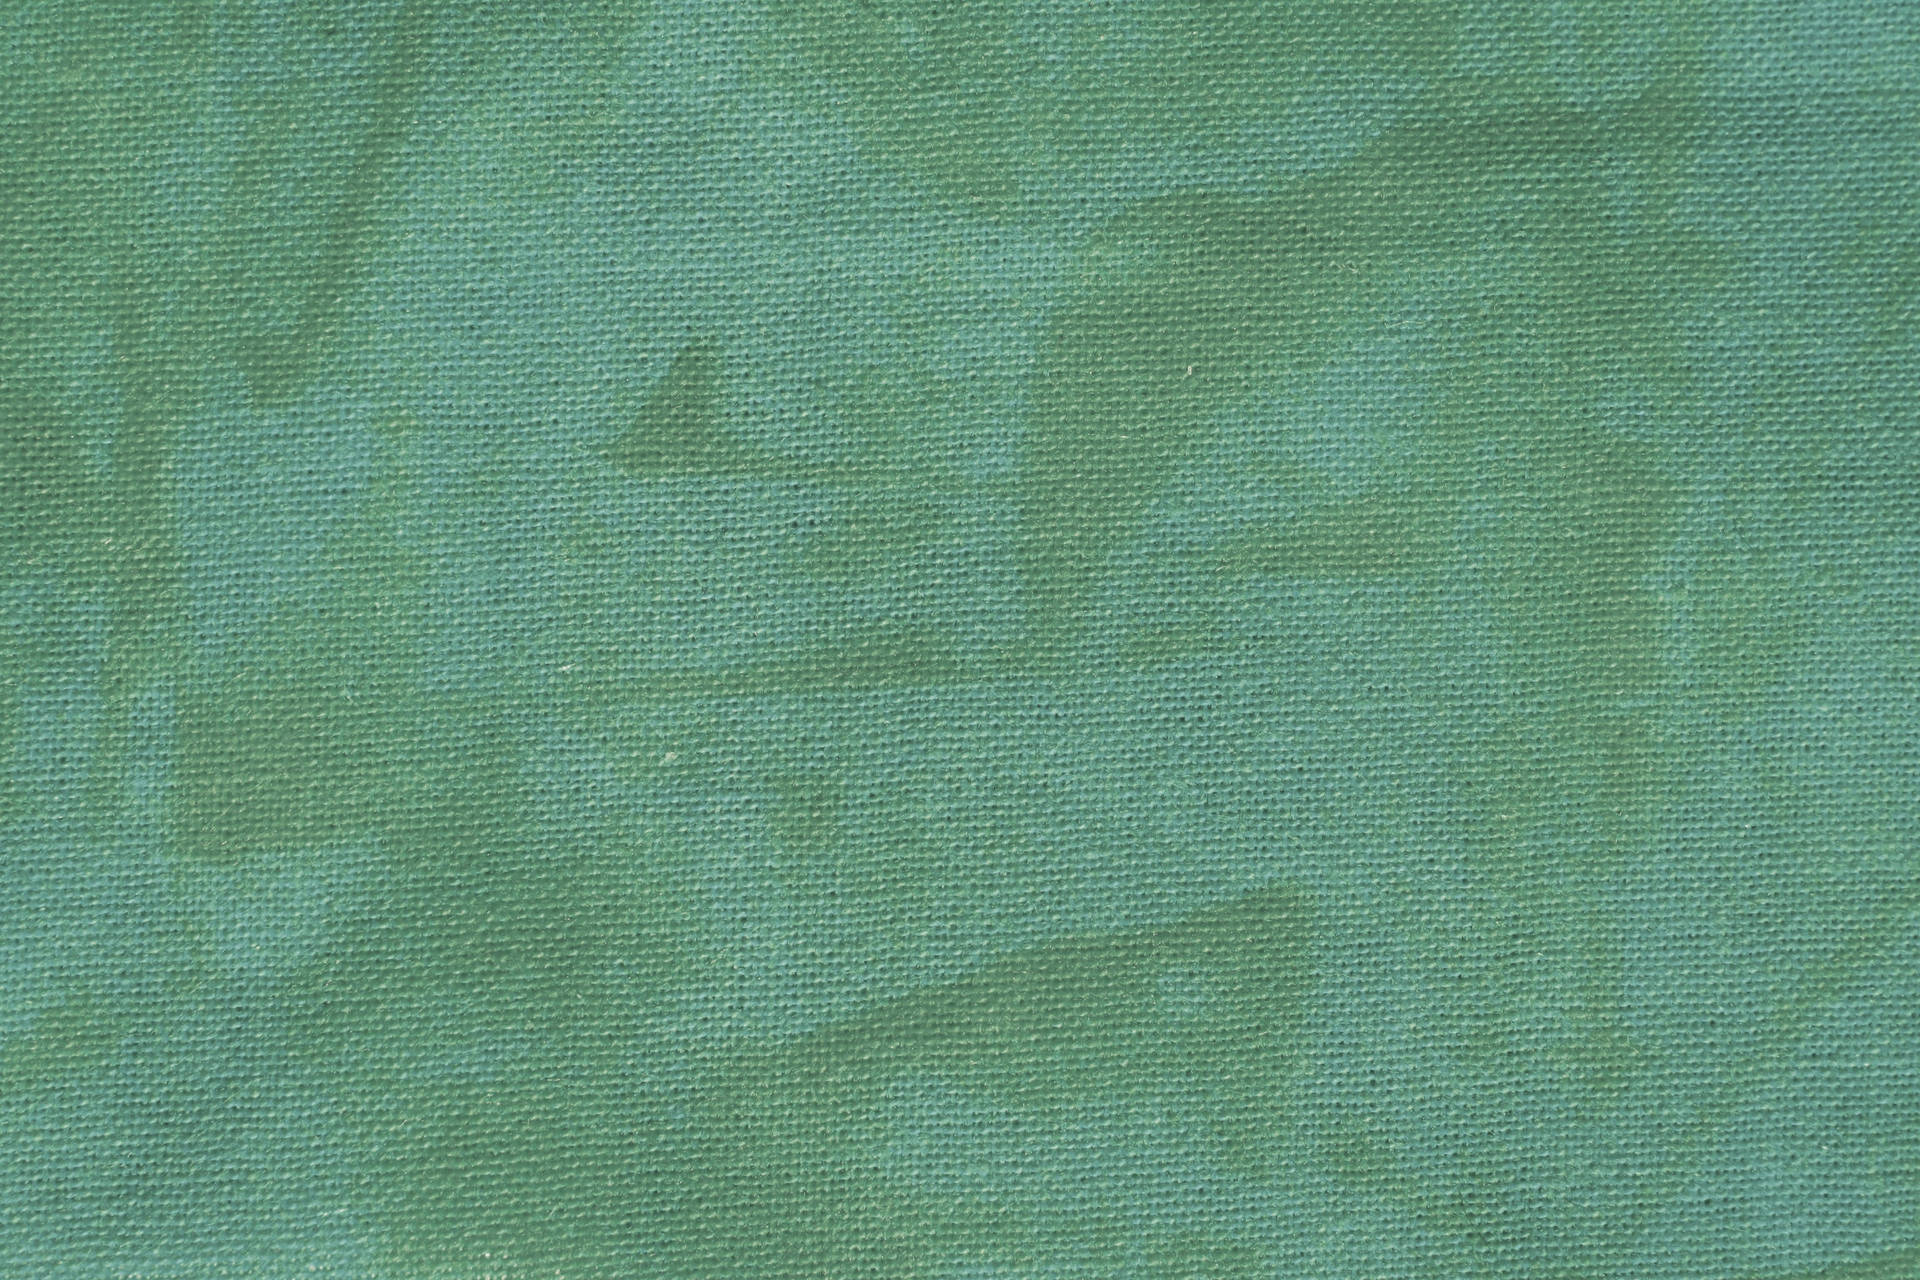 Sage Green 3888X2592 Wallpaper and Background Image